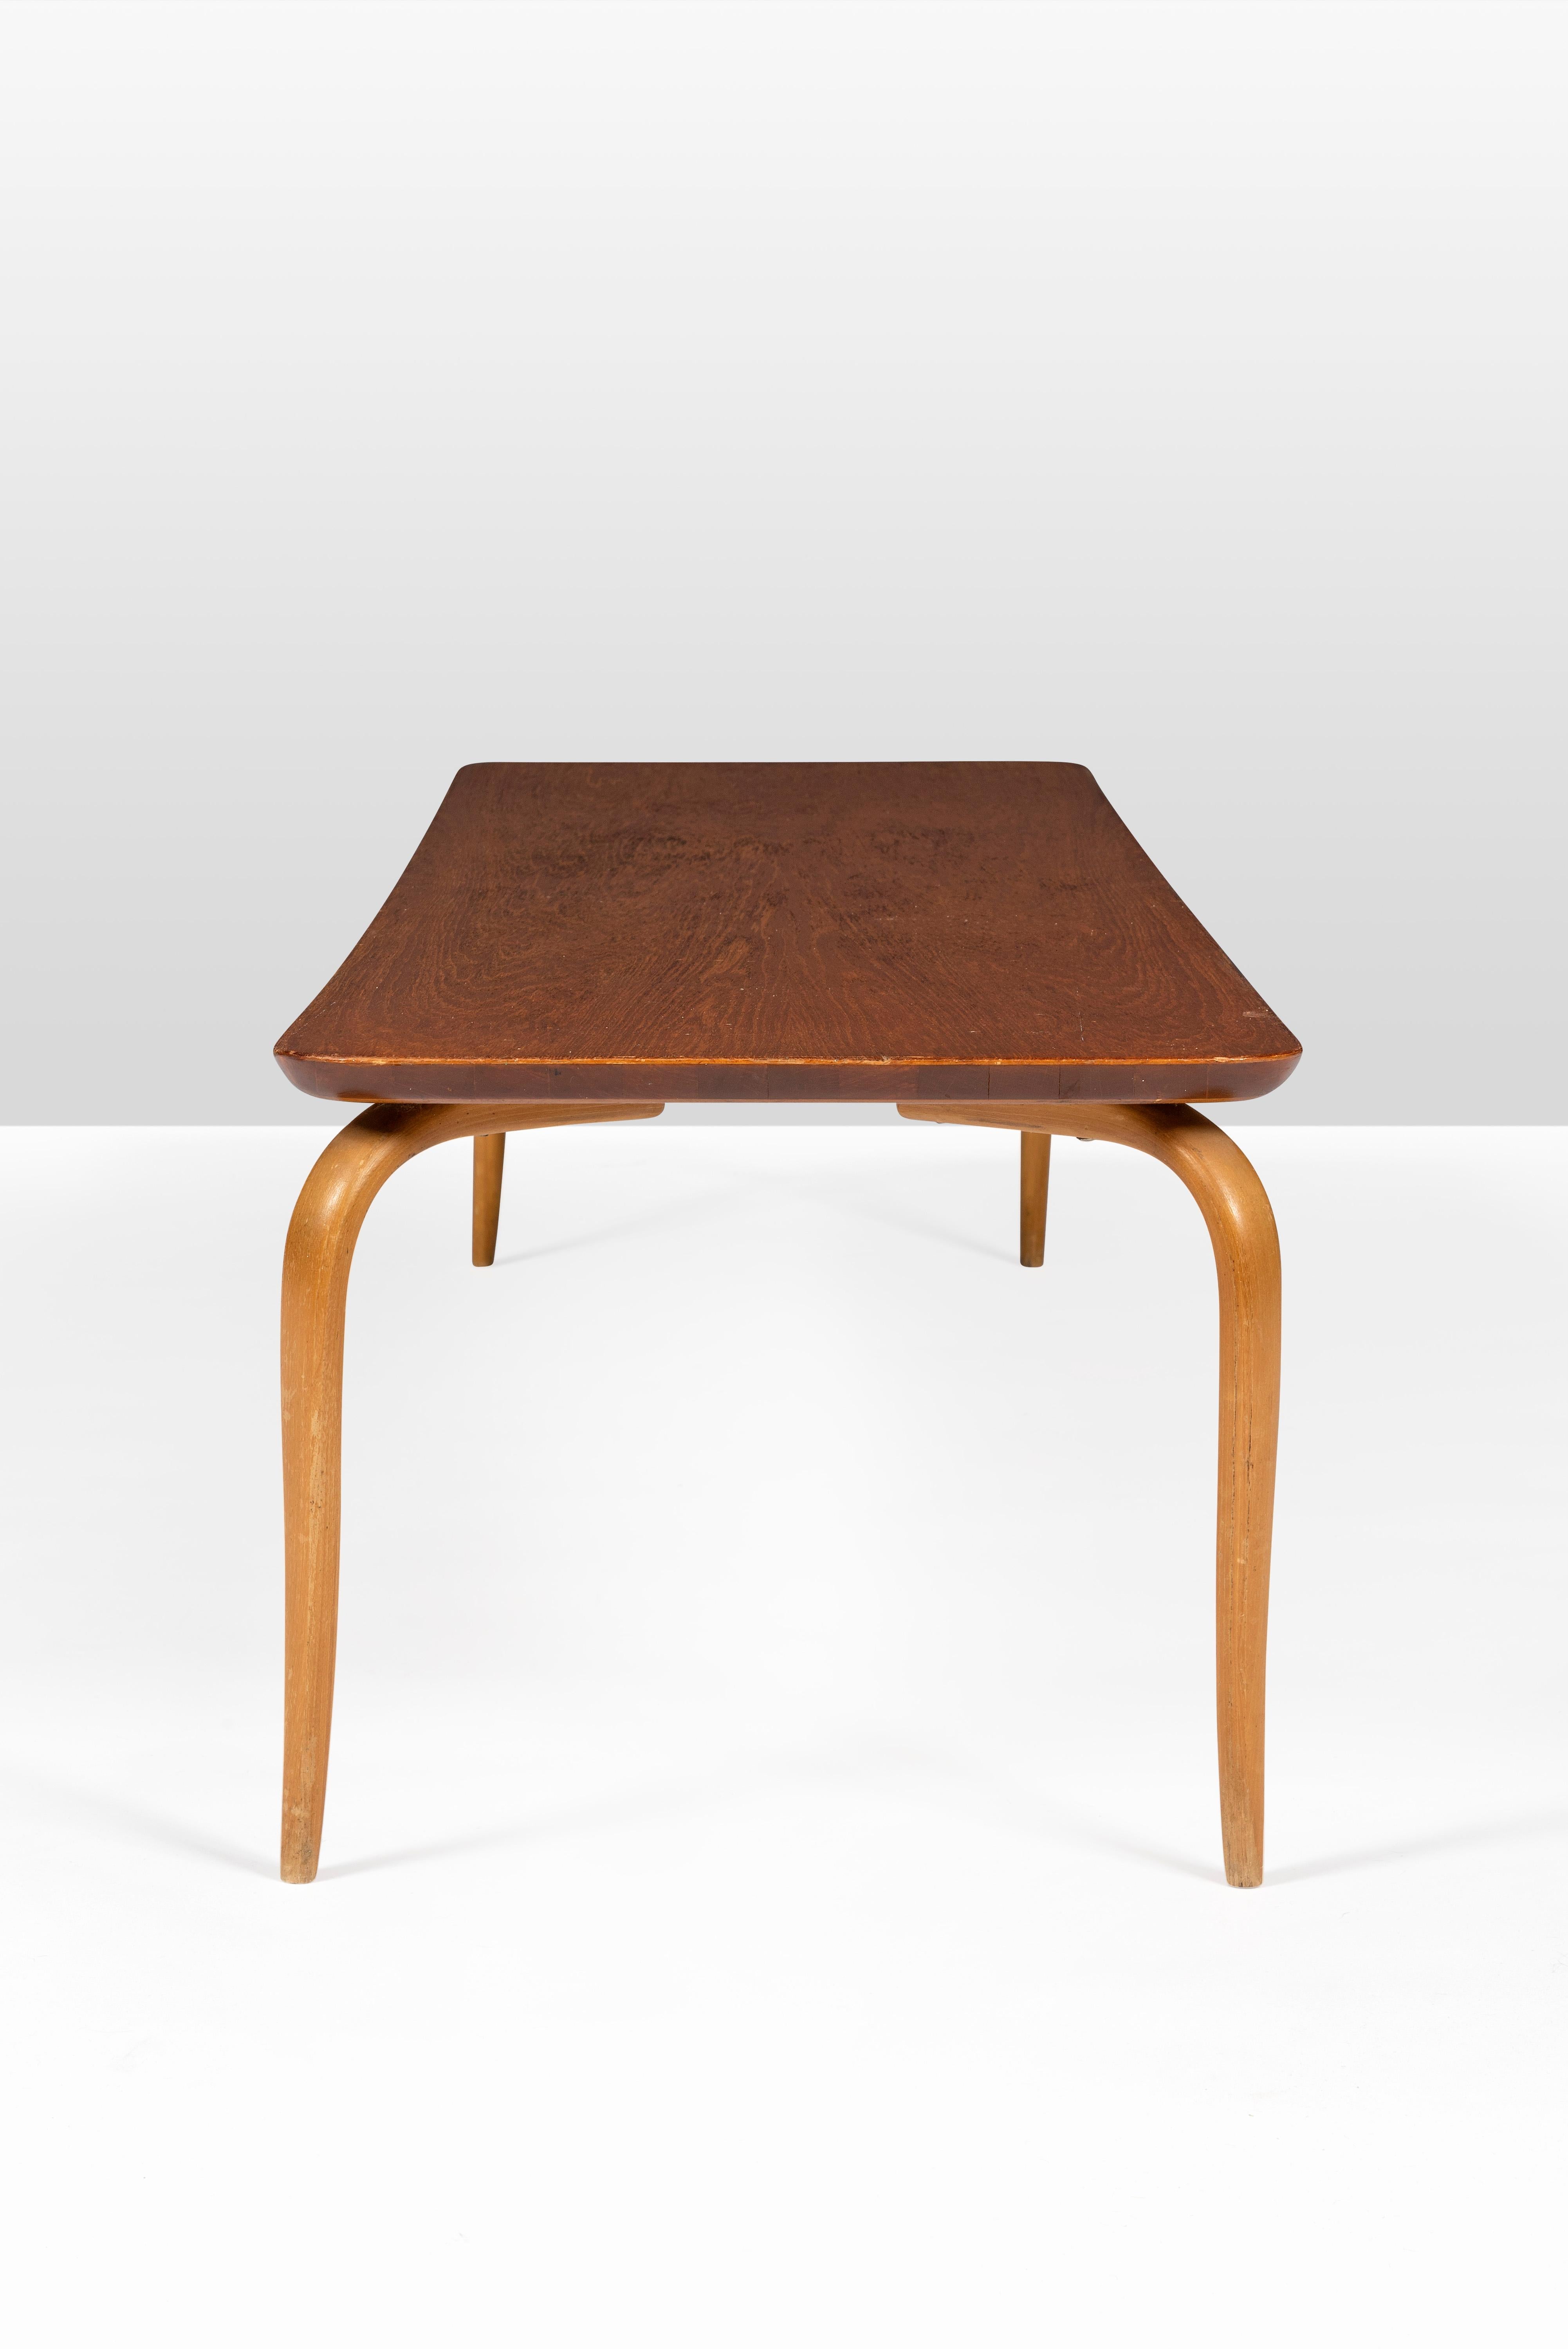 From the Annika series. 1950's. Stamped. Patinated wood.
As the descendant of four generations of Swedish master cabinetmakers, Bruno Mathsson was born to design furniture. Mathsson was known as a methodical perfectionist who made usefulness the